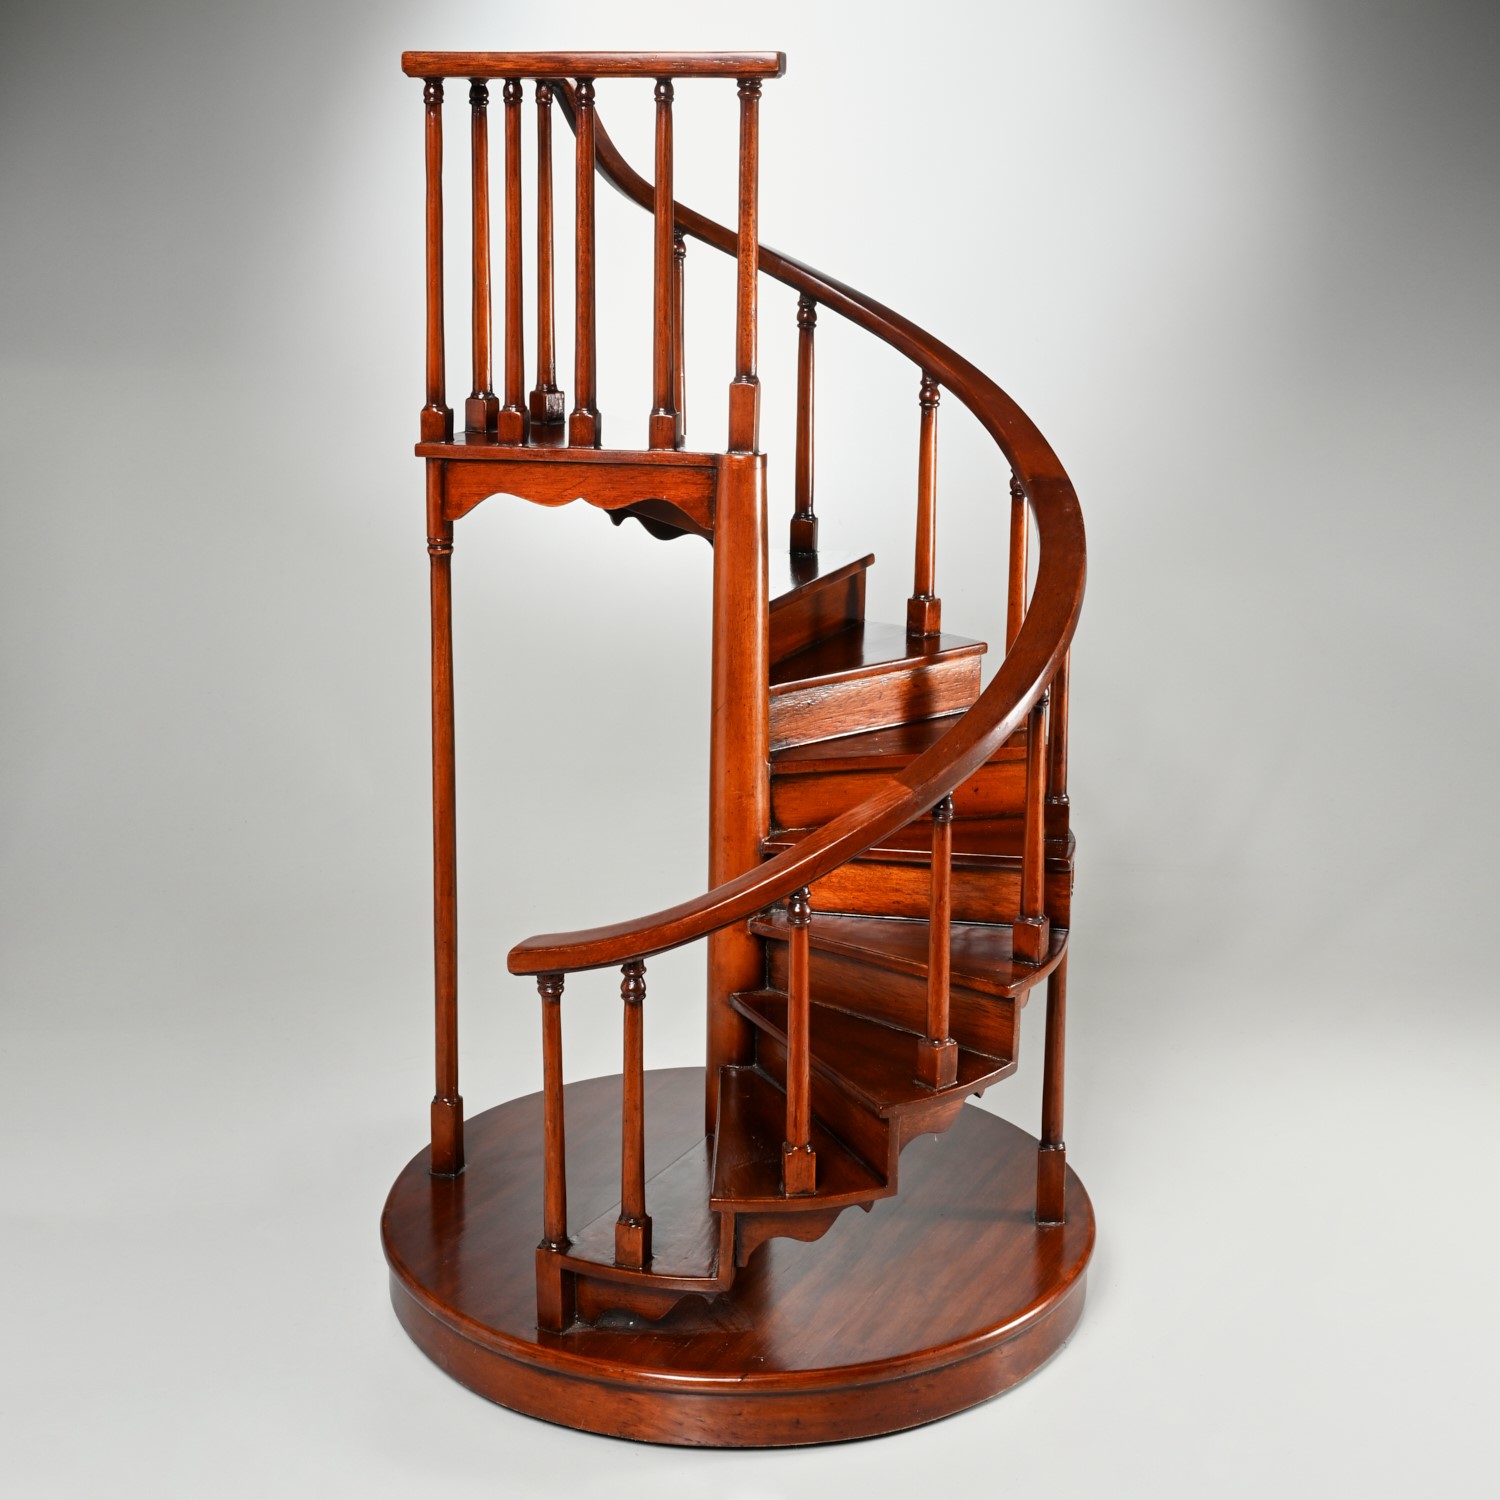 ARCHITECTURAL WINDING STAIRCASE 361e74